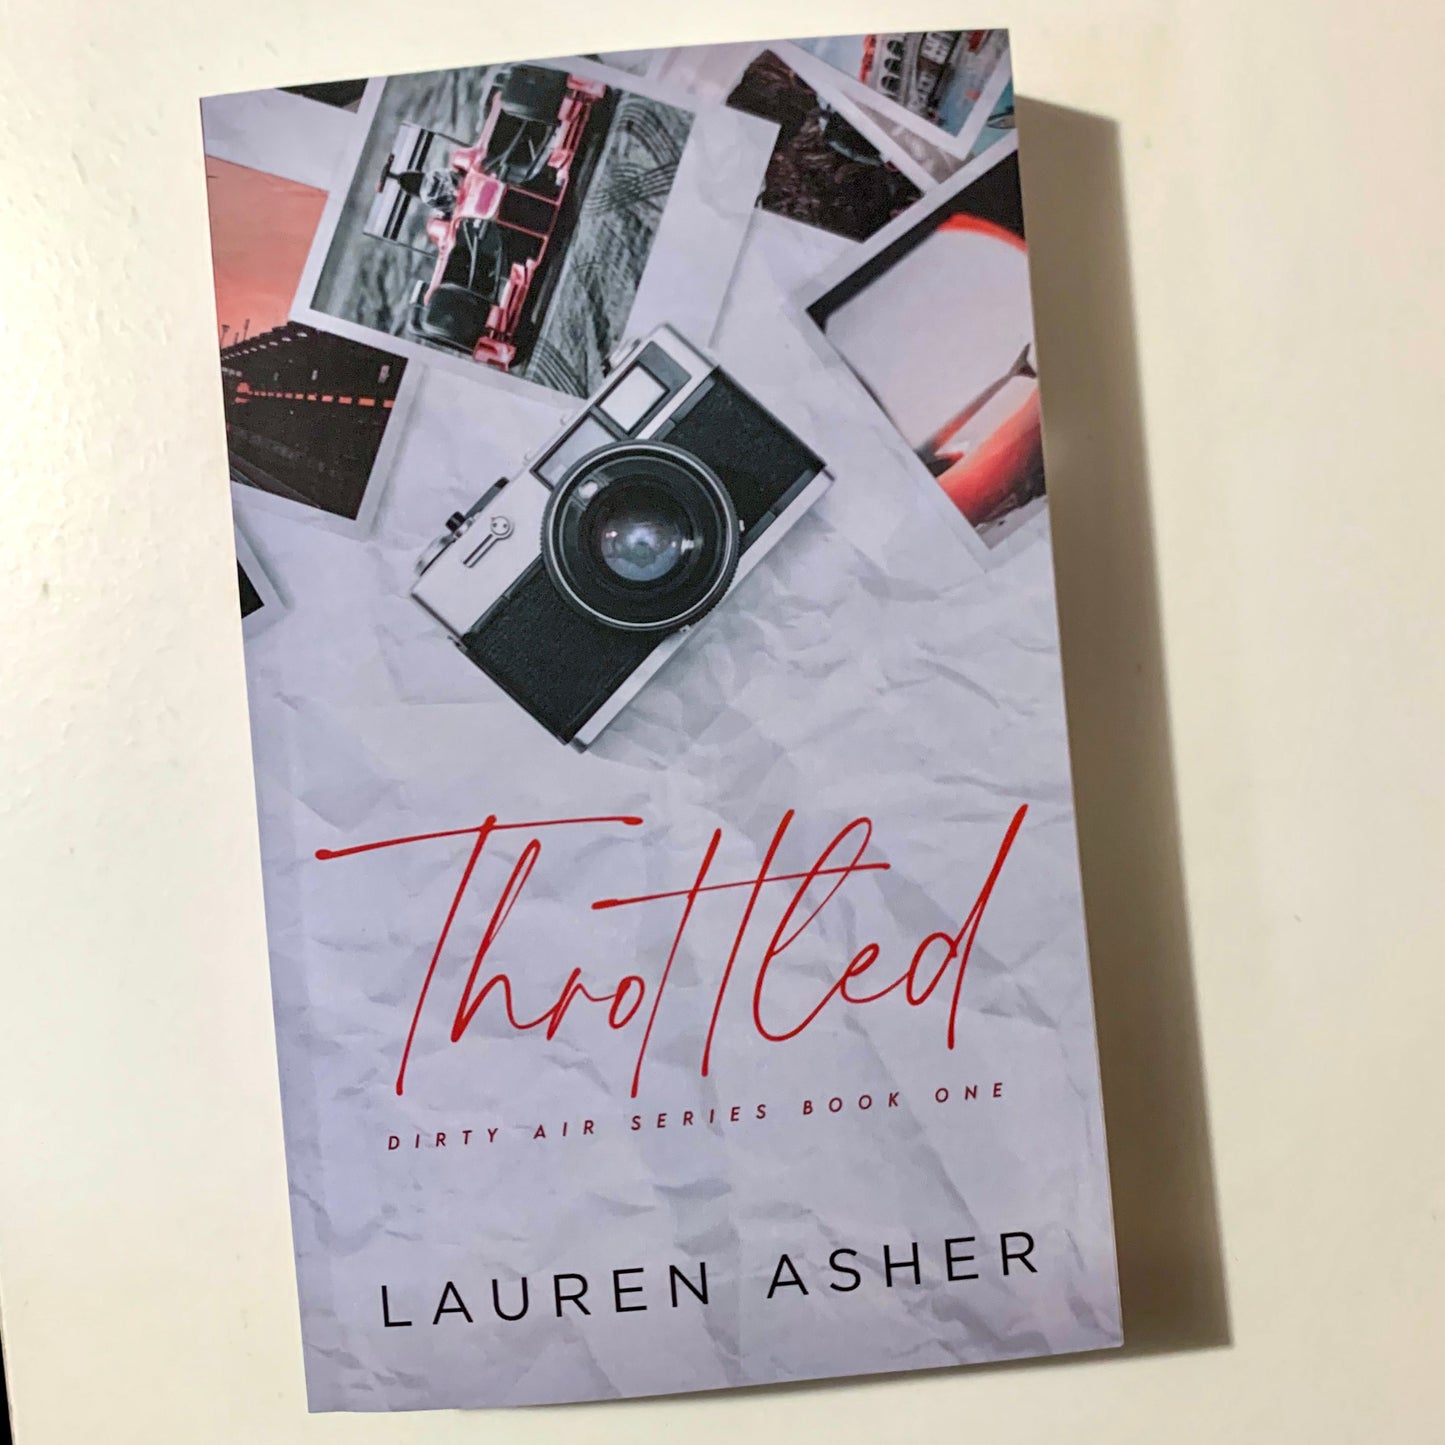 Dirty Air series by Lauren Asher (imperfect copies)